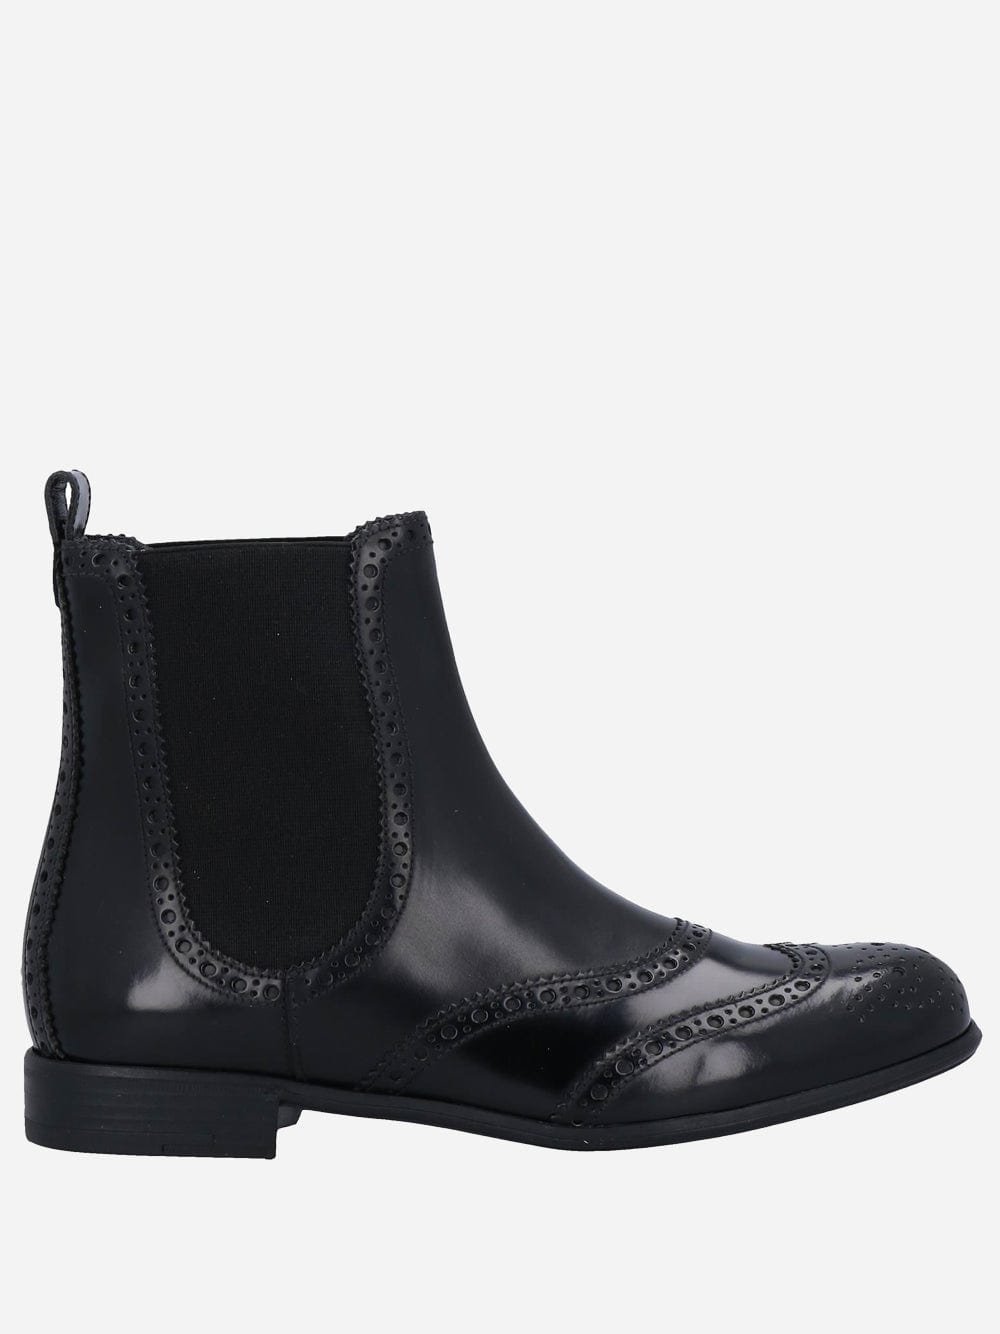 Dolce & Gabbana Oxford Ankle Boots